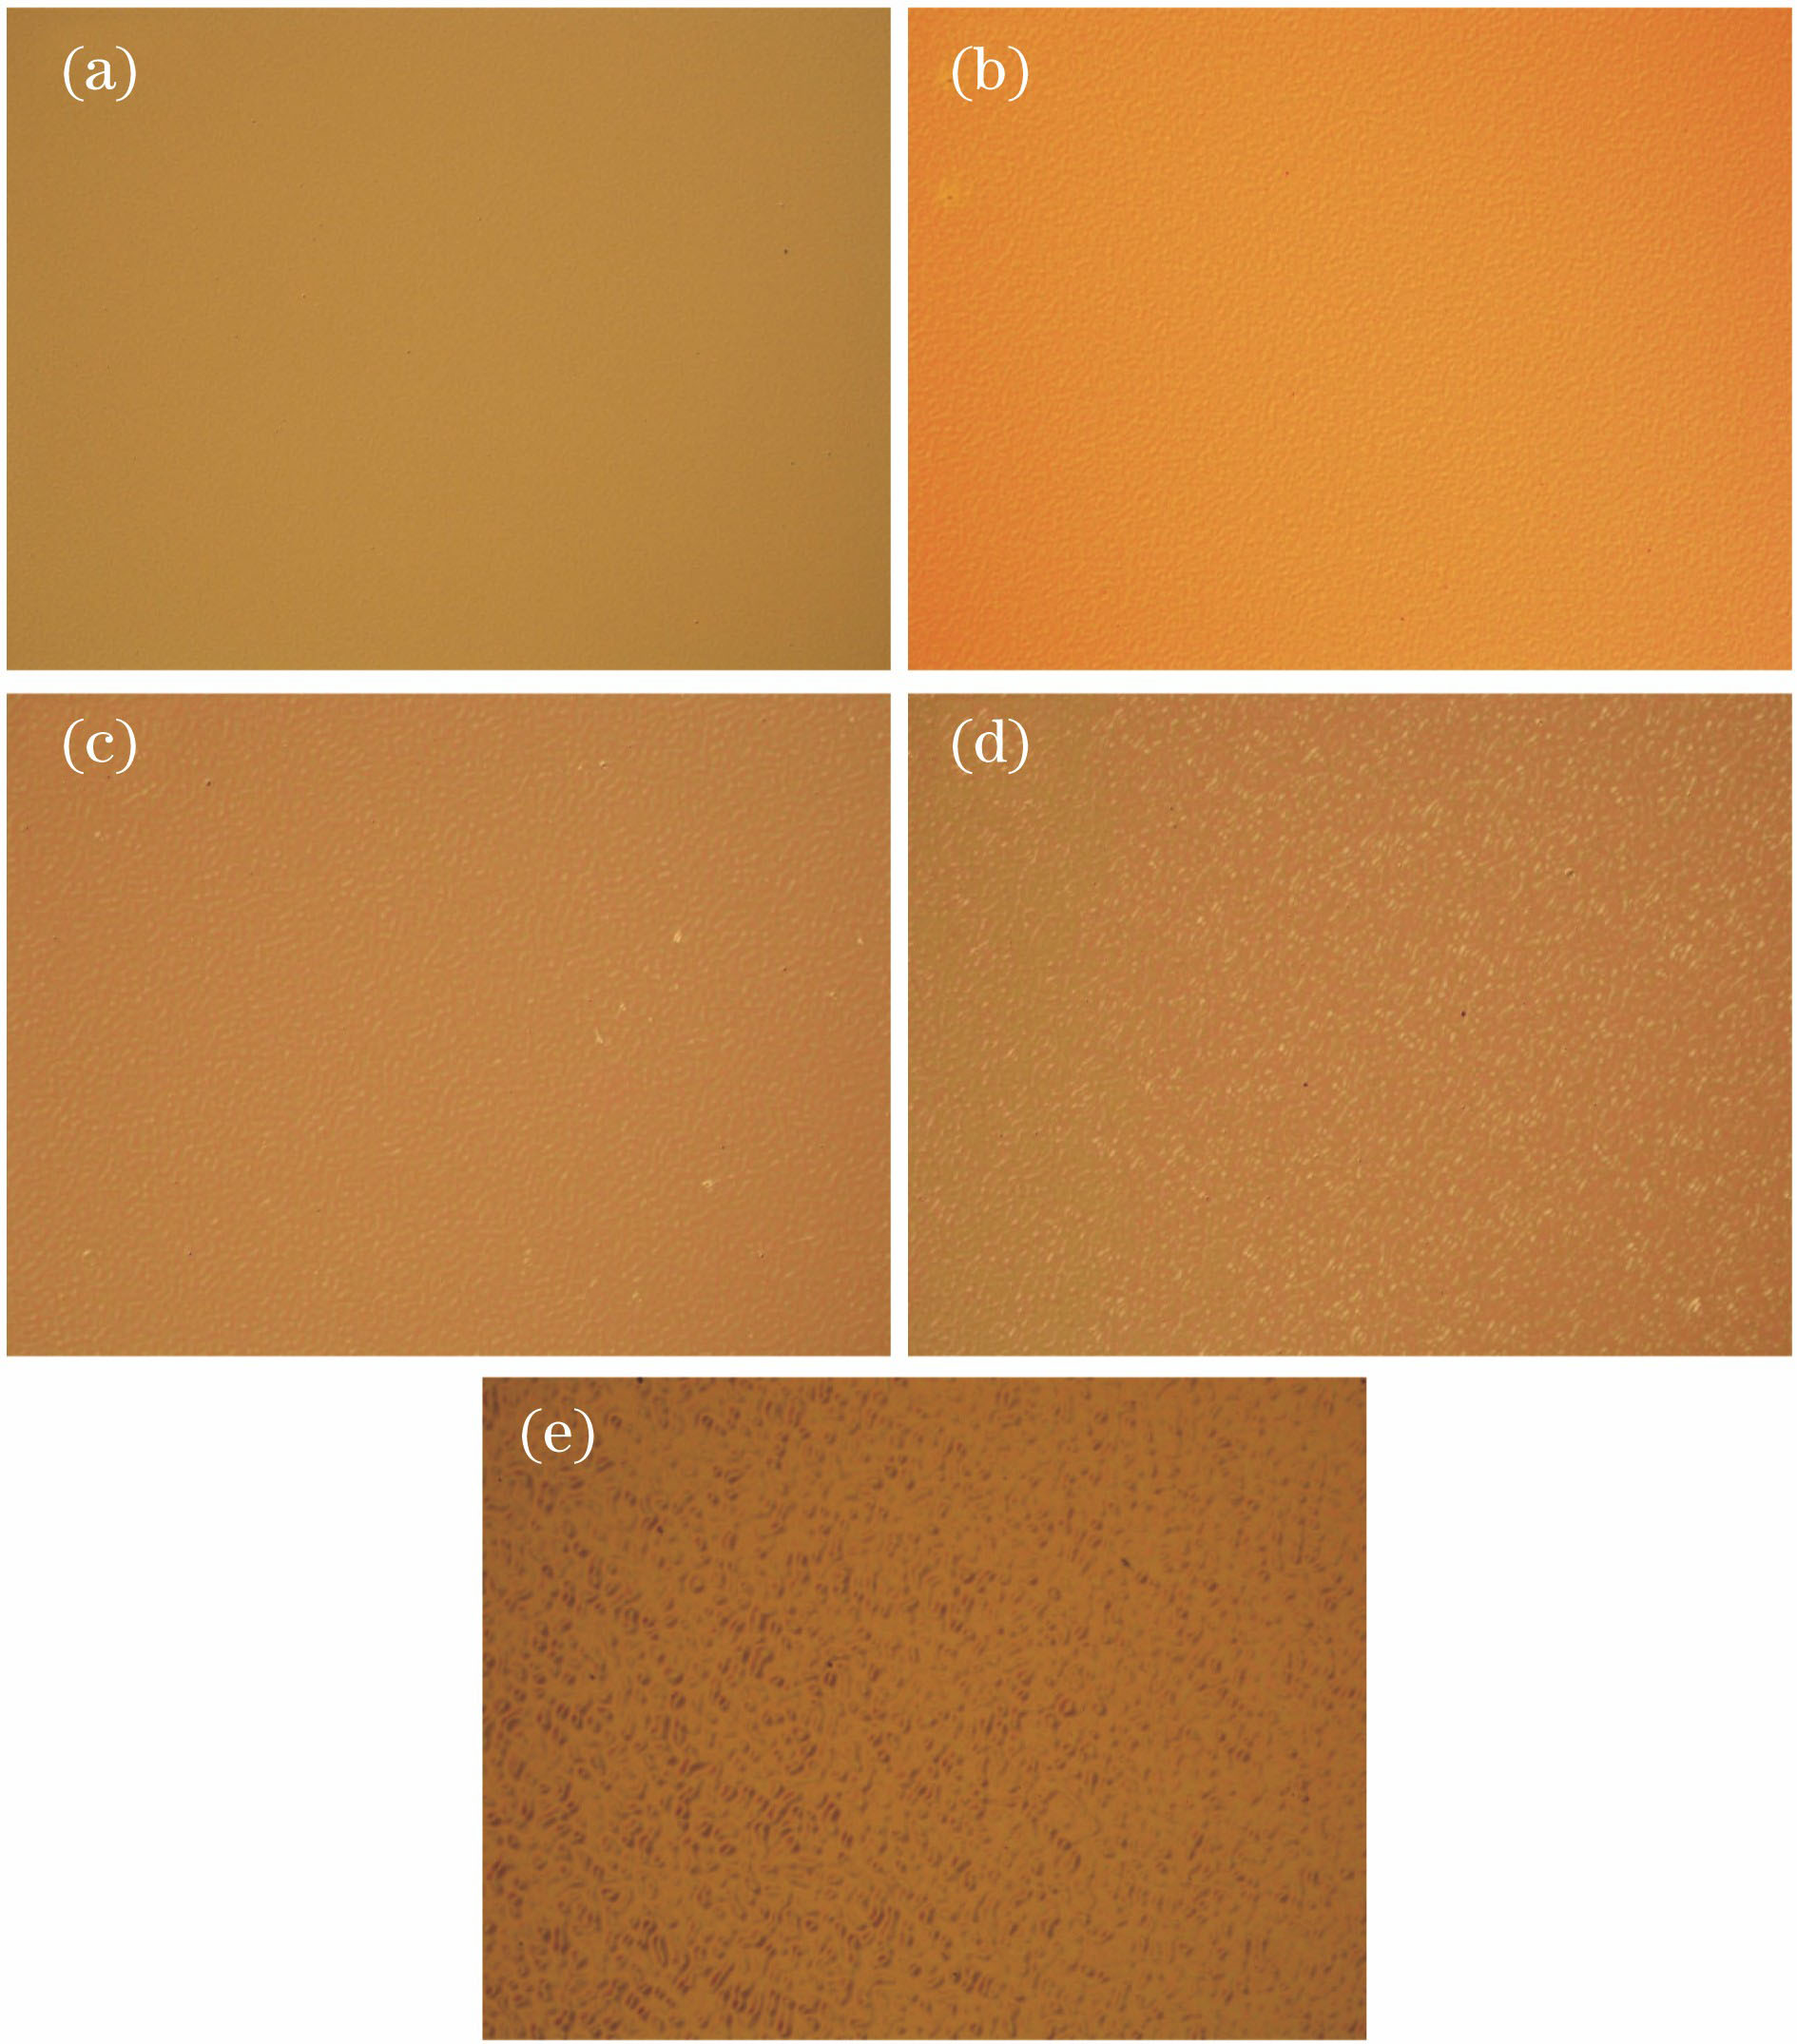 Surface morphologies of WO3 films with different mixture ratios. (a) Sample 1; (b) sample 2; (c) sample 3; (d) sample 4; (e) sample 5